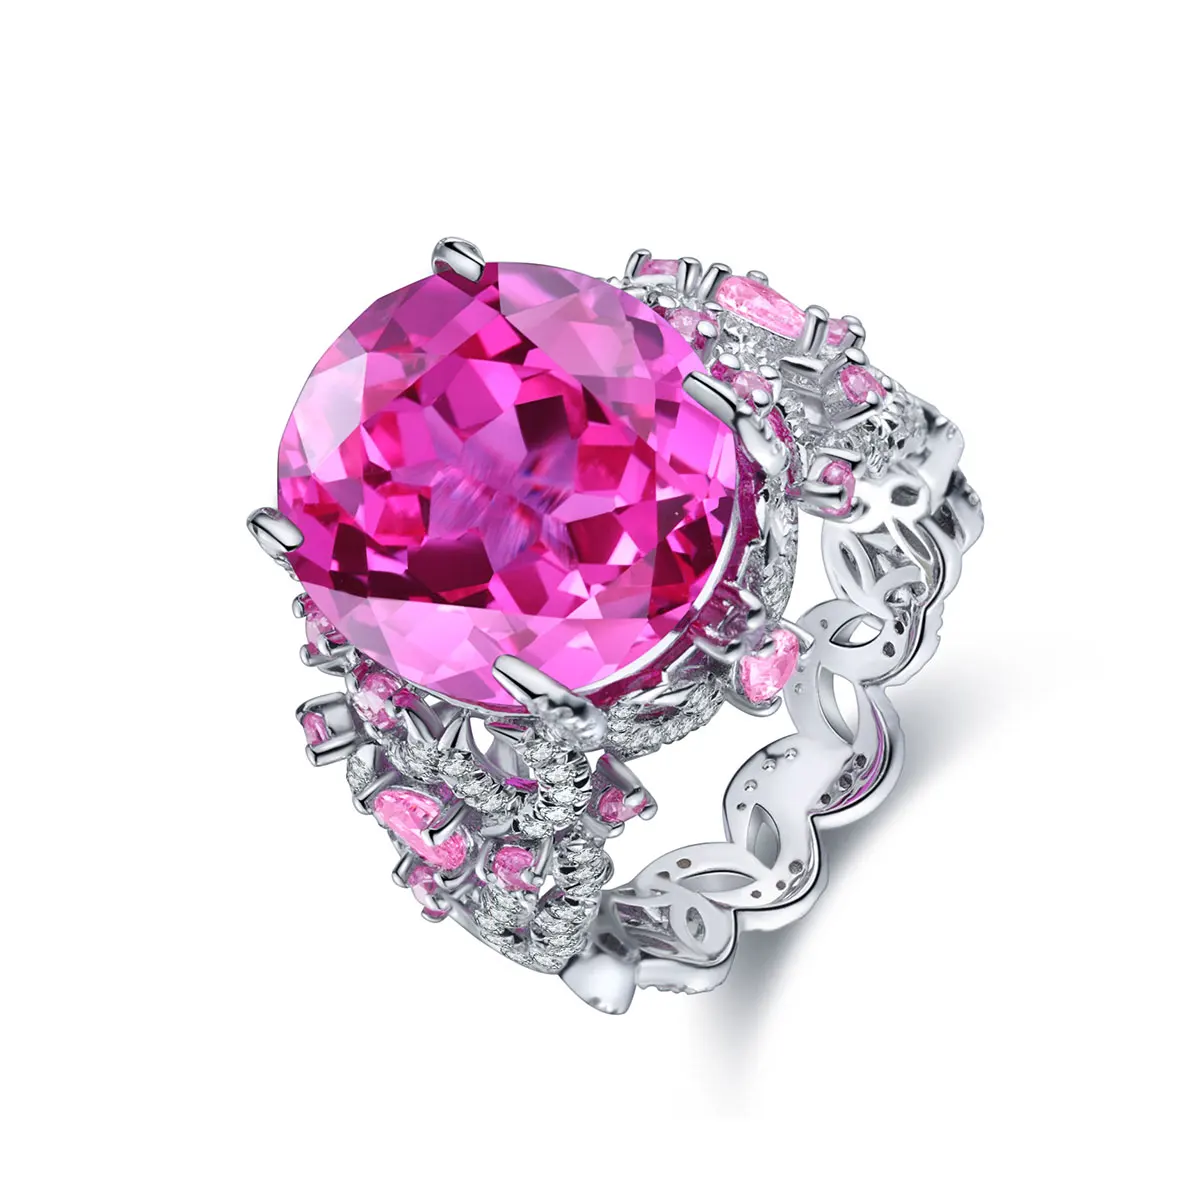 

Anster jewelry s925 sterling silver lab grown pink ruby sapphire gemstones ring round brilliant ring jewelry wholesale